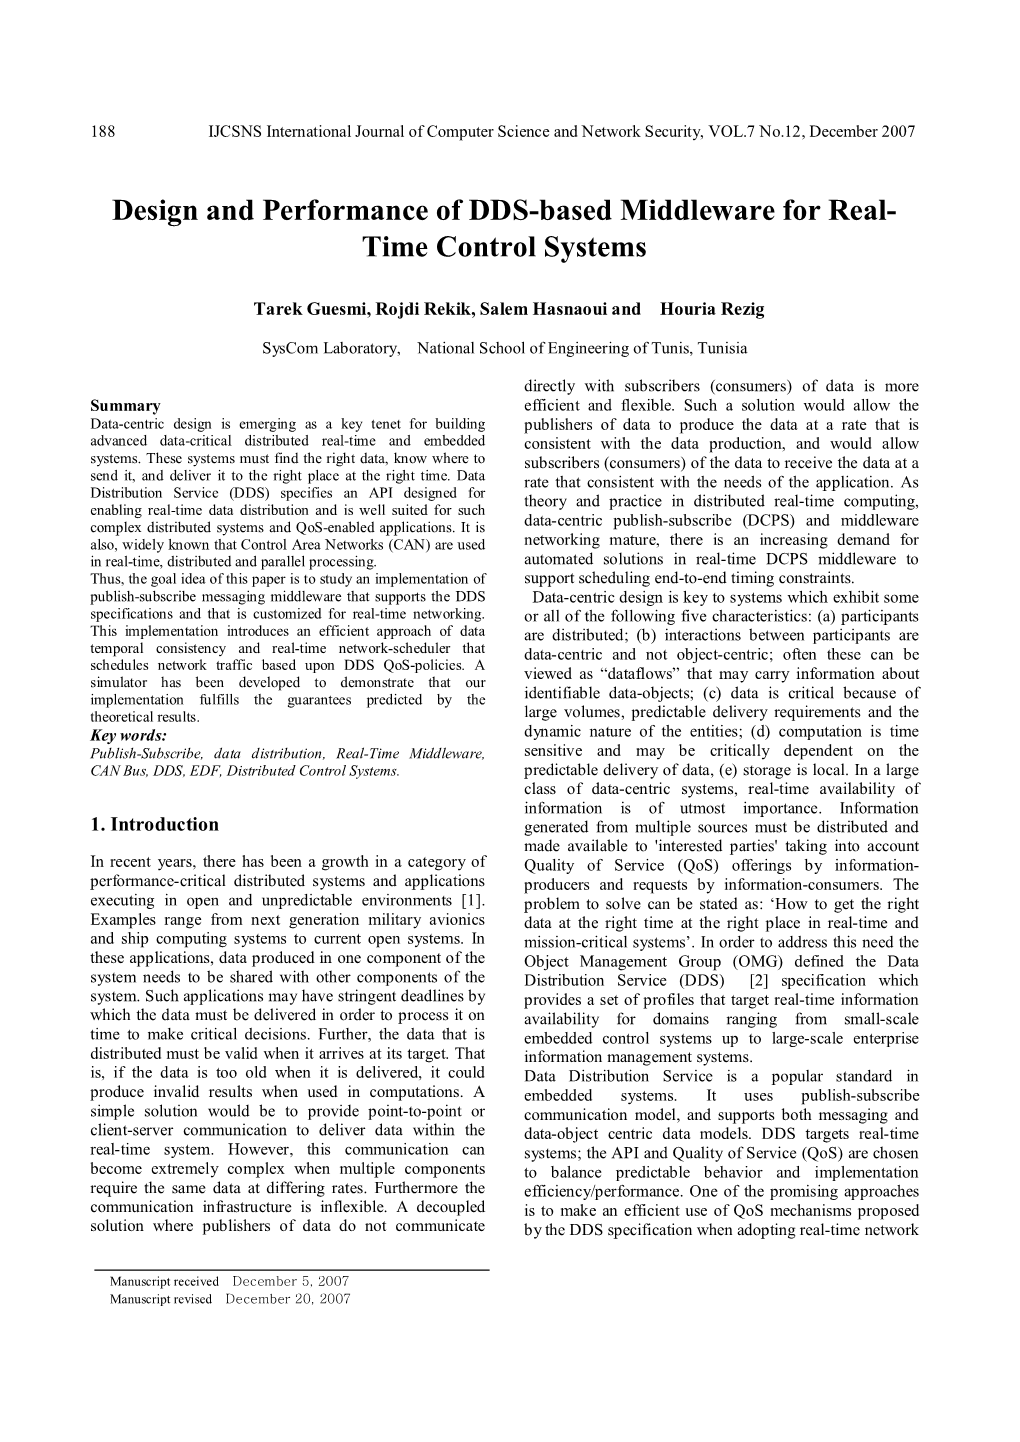 Design and Performance of DDS-Based Middleware for Real- Time Control Systems